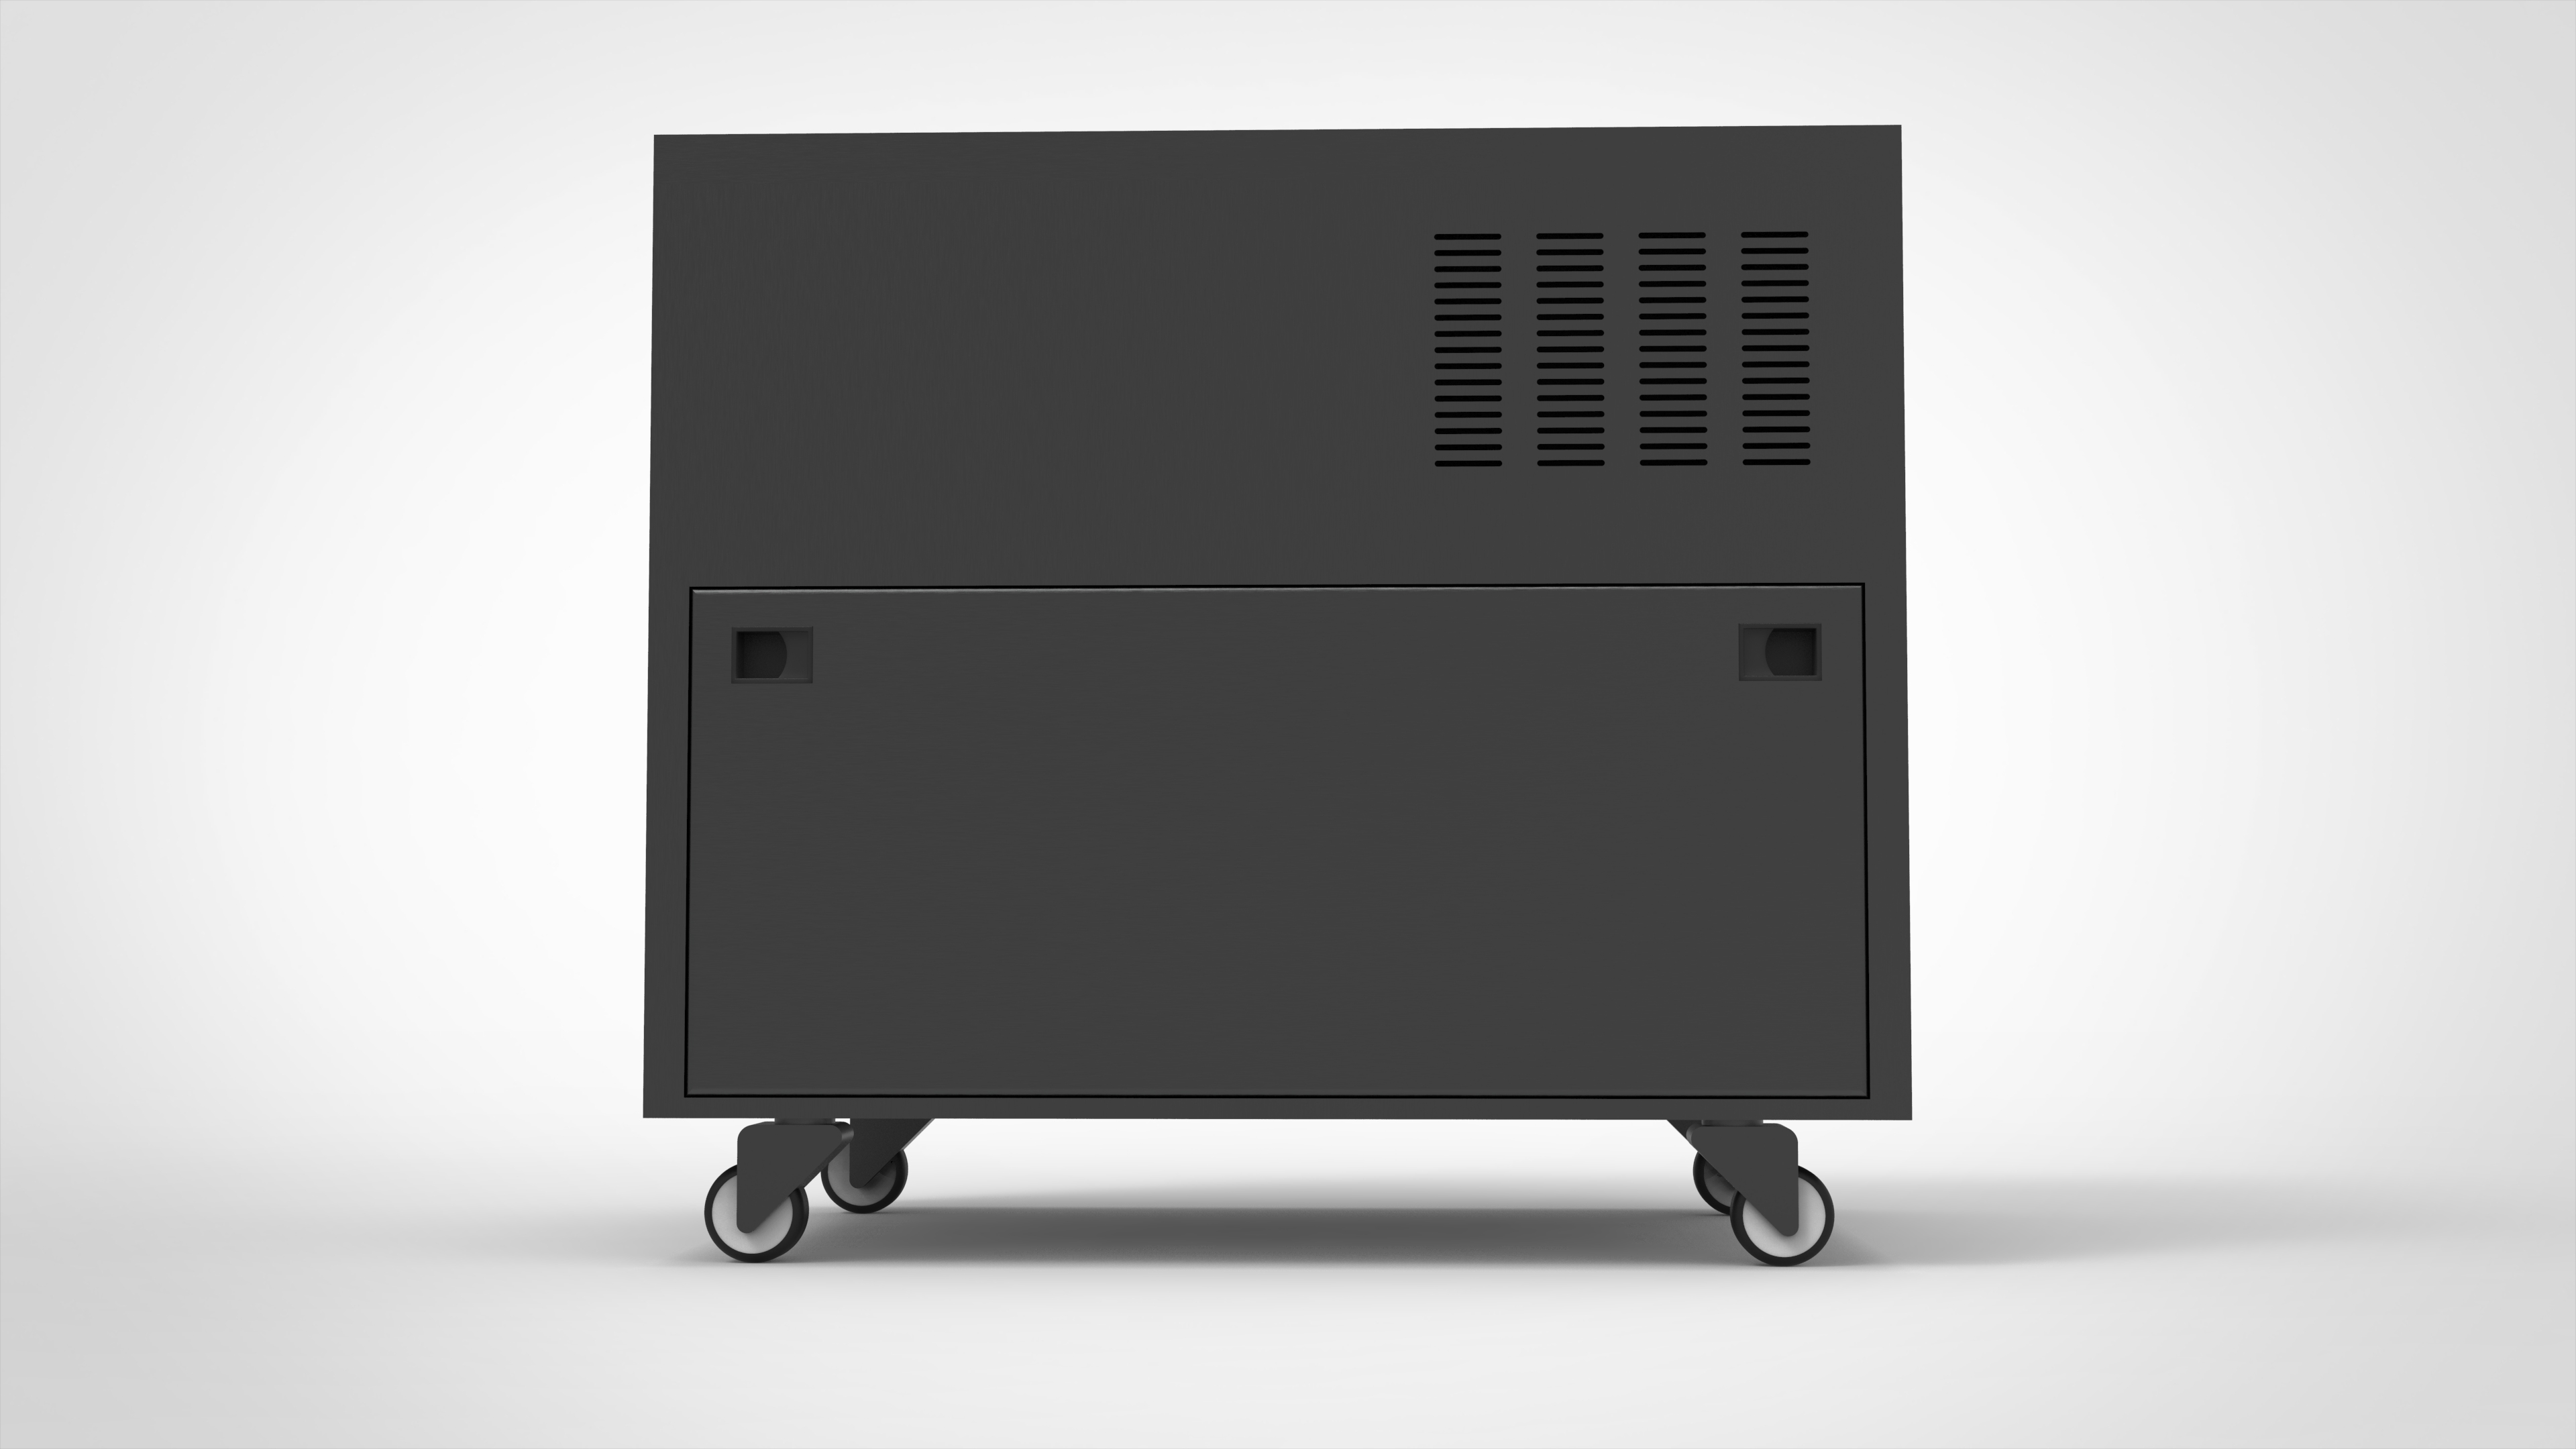 5000w 110v electric in One Solar Power System for Camper